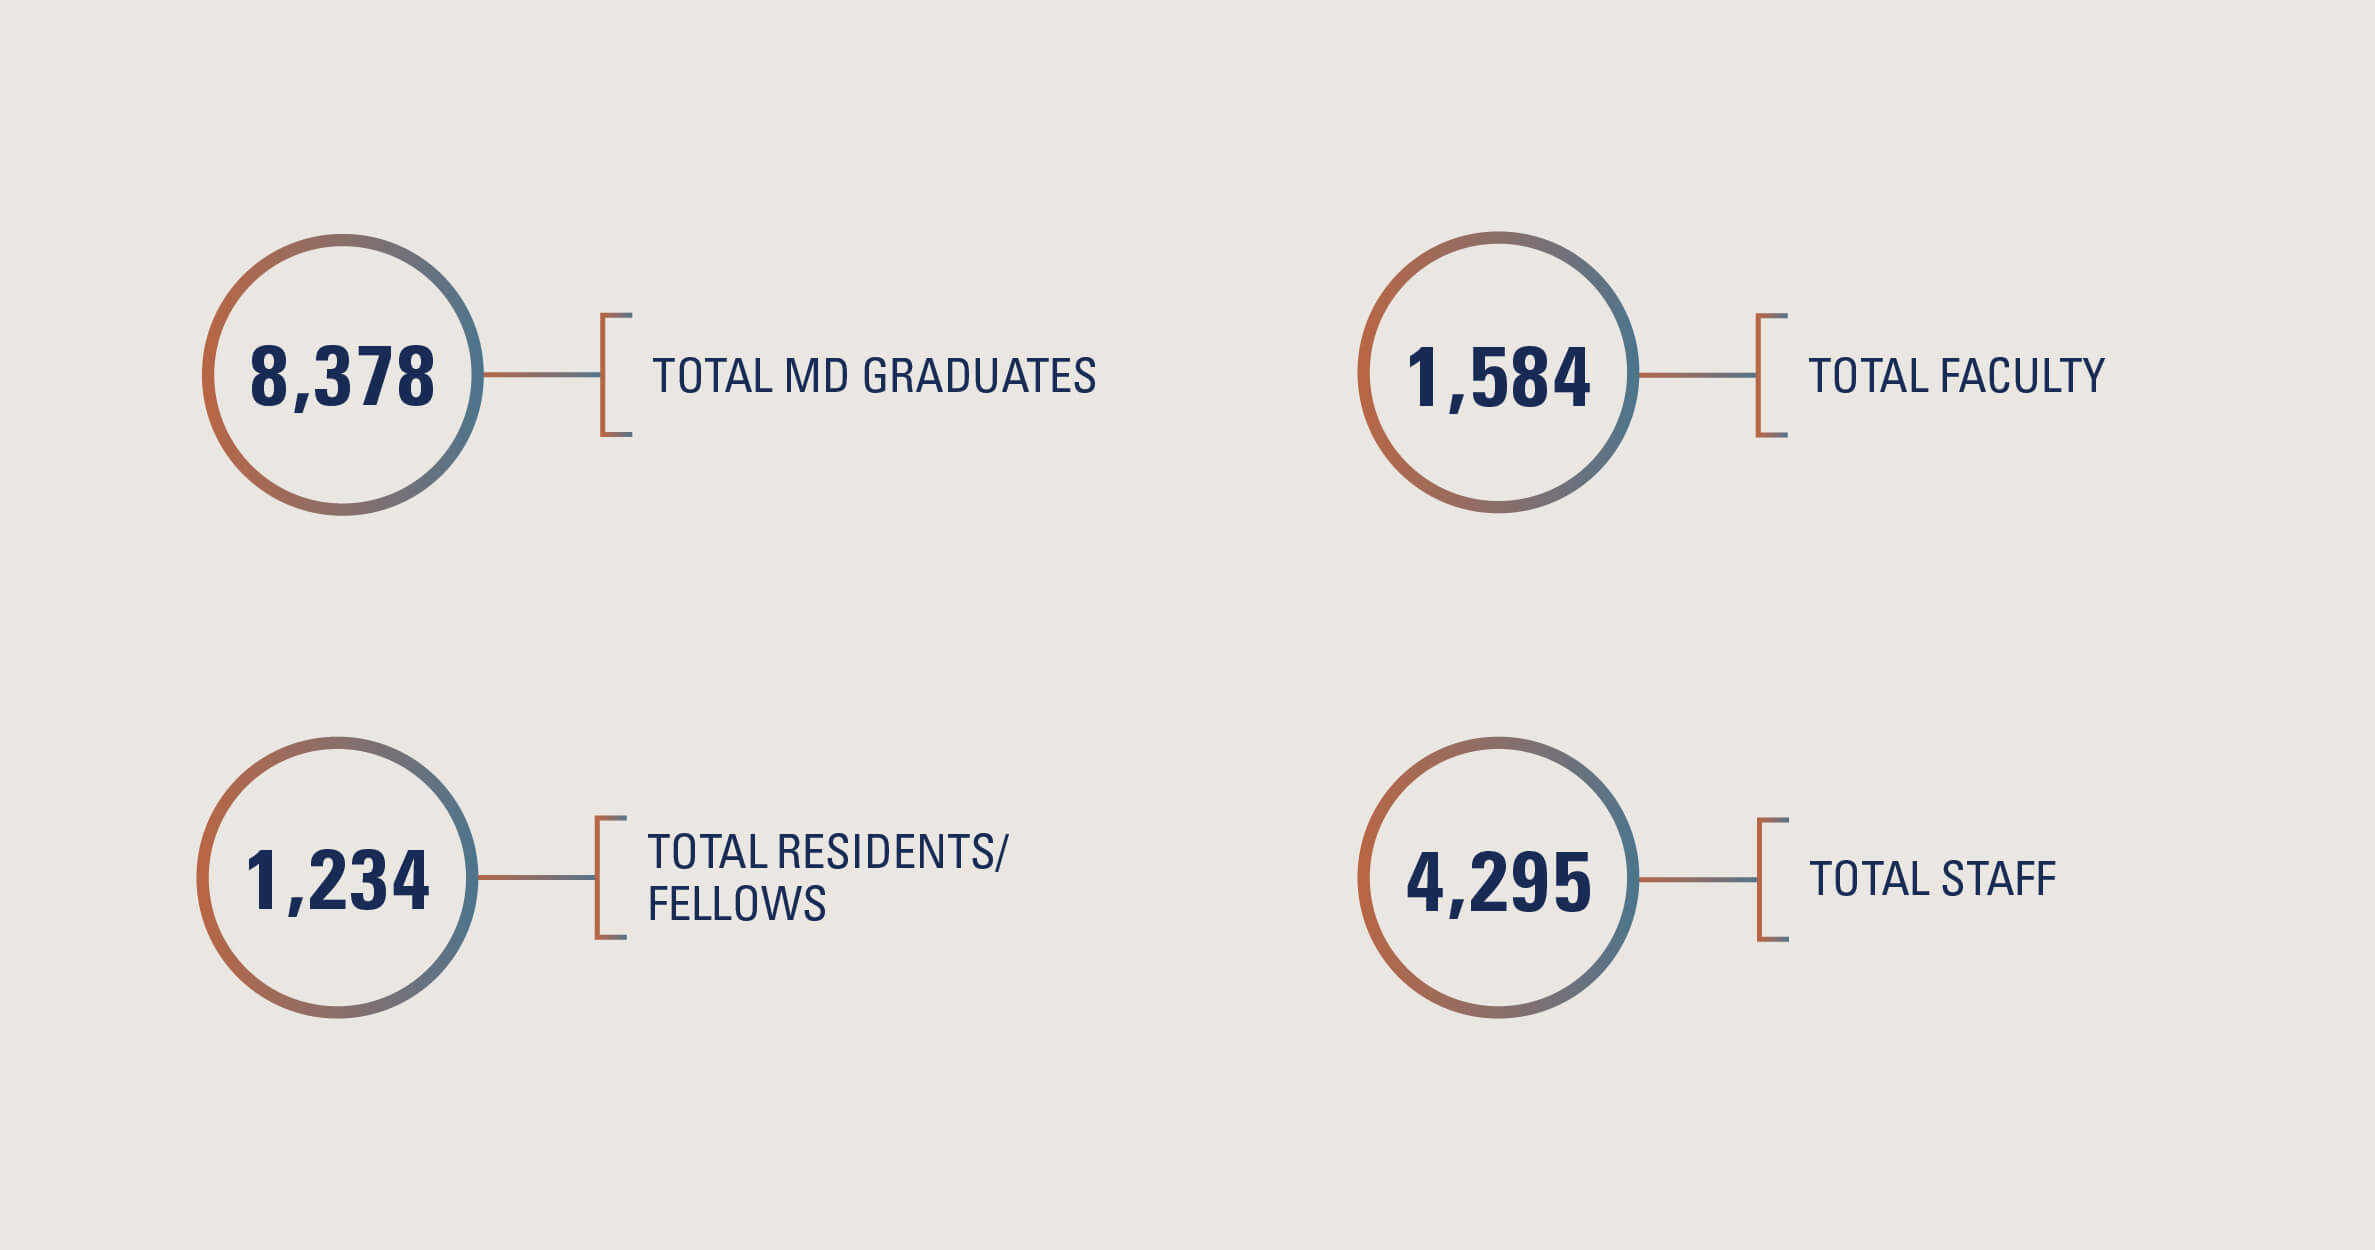 Statistics describing 8,378 total MD graduates, 1,584 total faculty, 1,234 total residents/fellows and 4,295 total staff